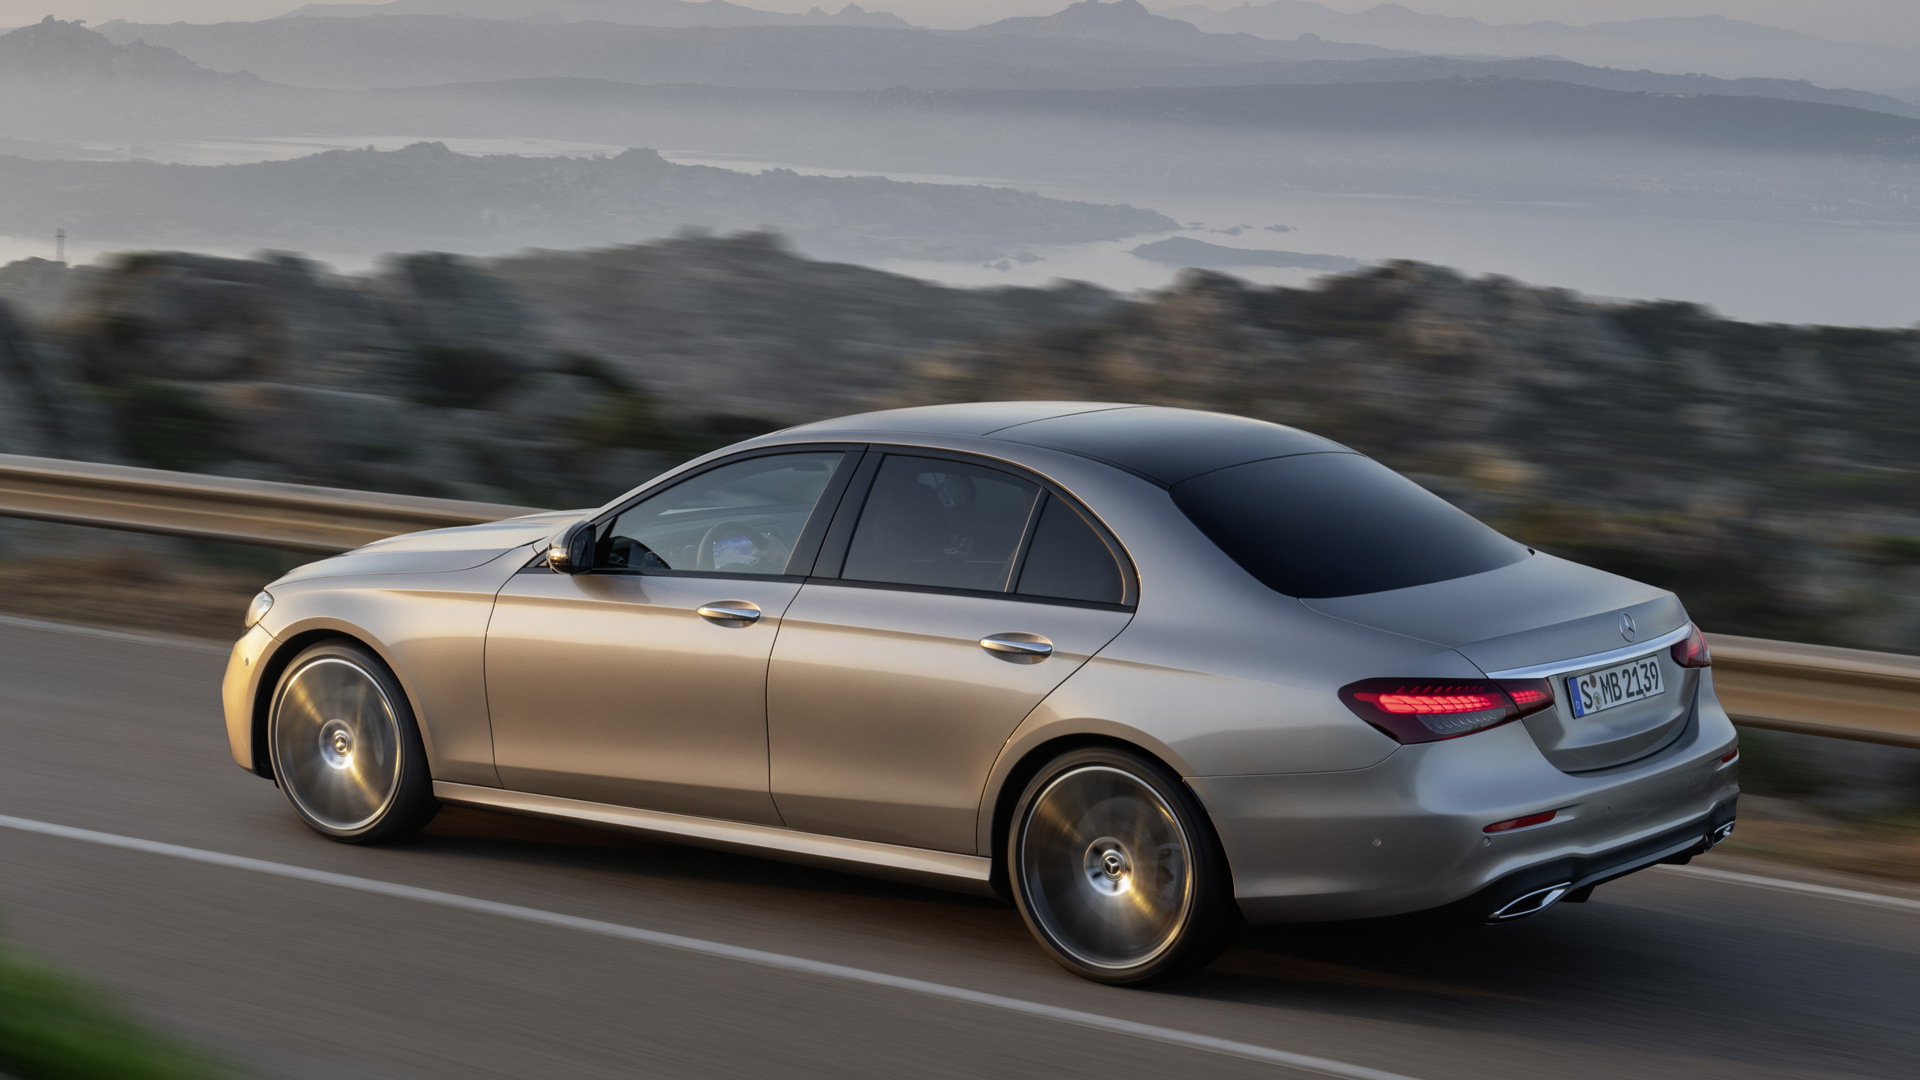 Preview 21 Mercedes Benz E Class Receives Fresh Looks 55 300 Starting Price